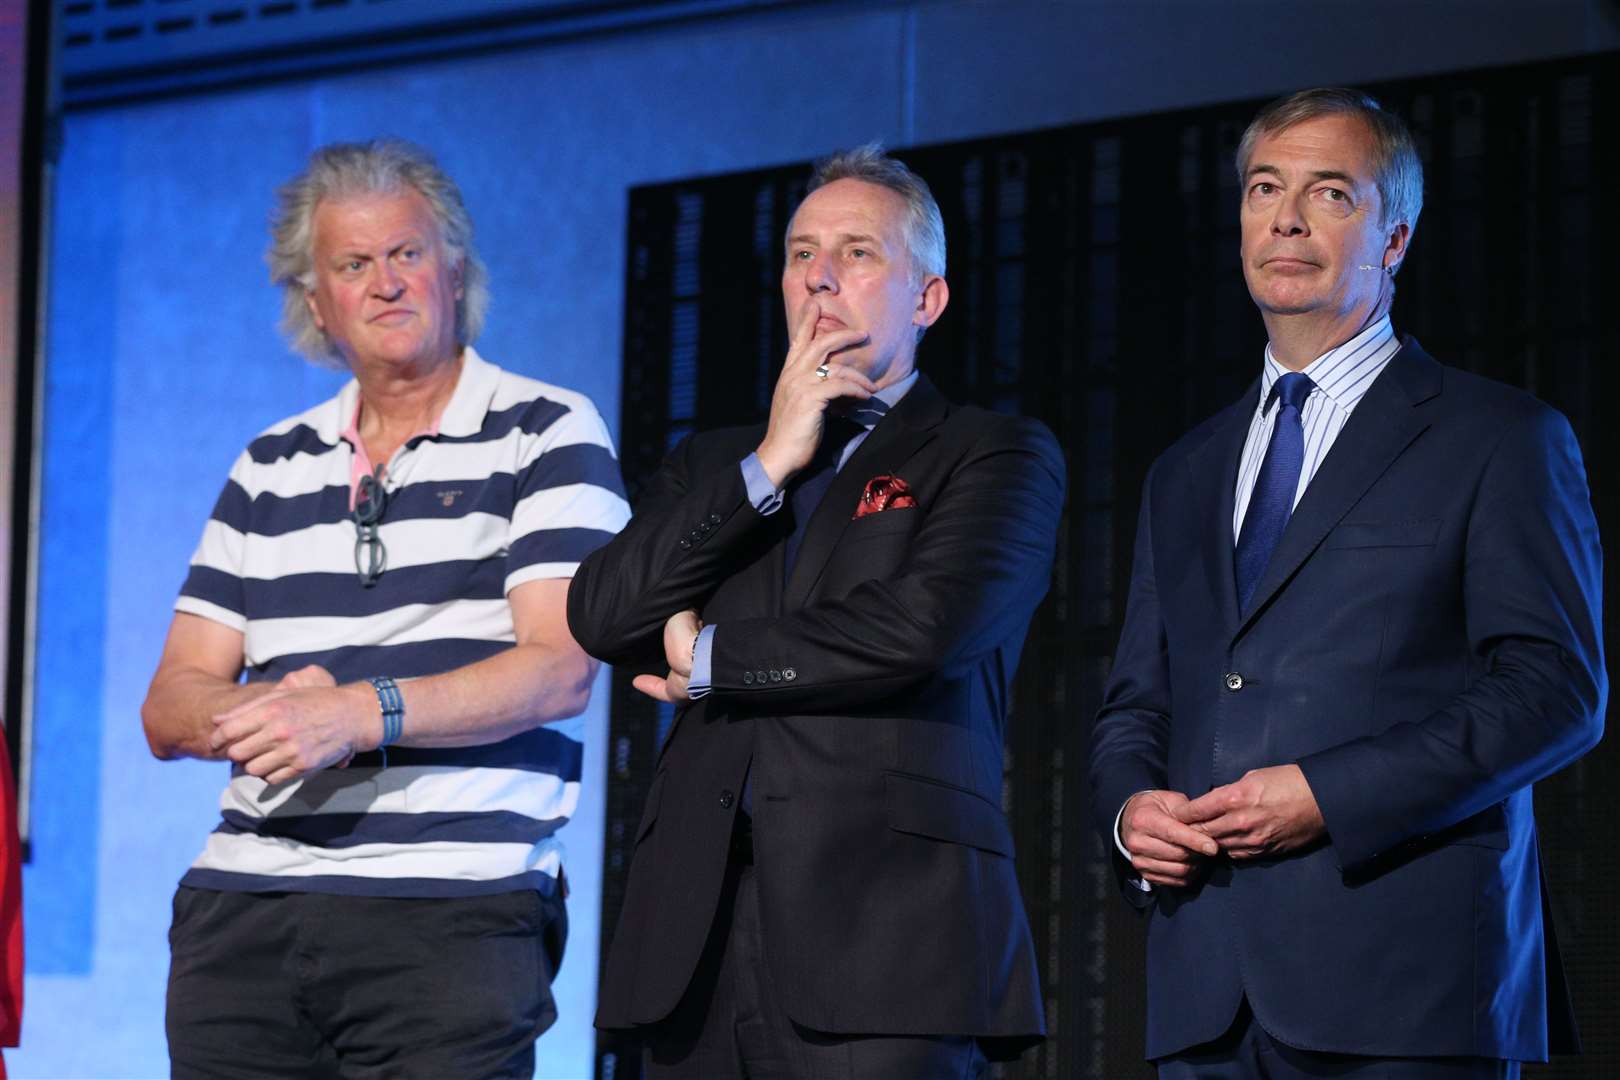 Wetherspoon founder Tim Martin (left), who has been a prominent political campaigner, urged the Government to follow Sweden’s Covid-19 strategy (Jonathan Brady/PA)